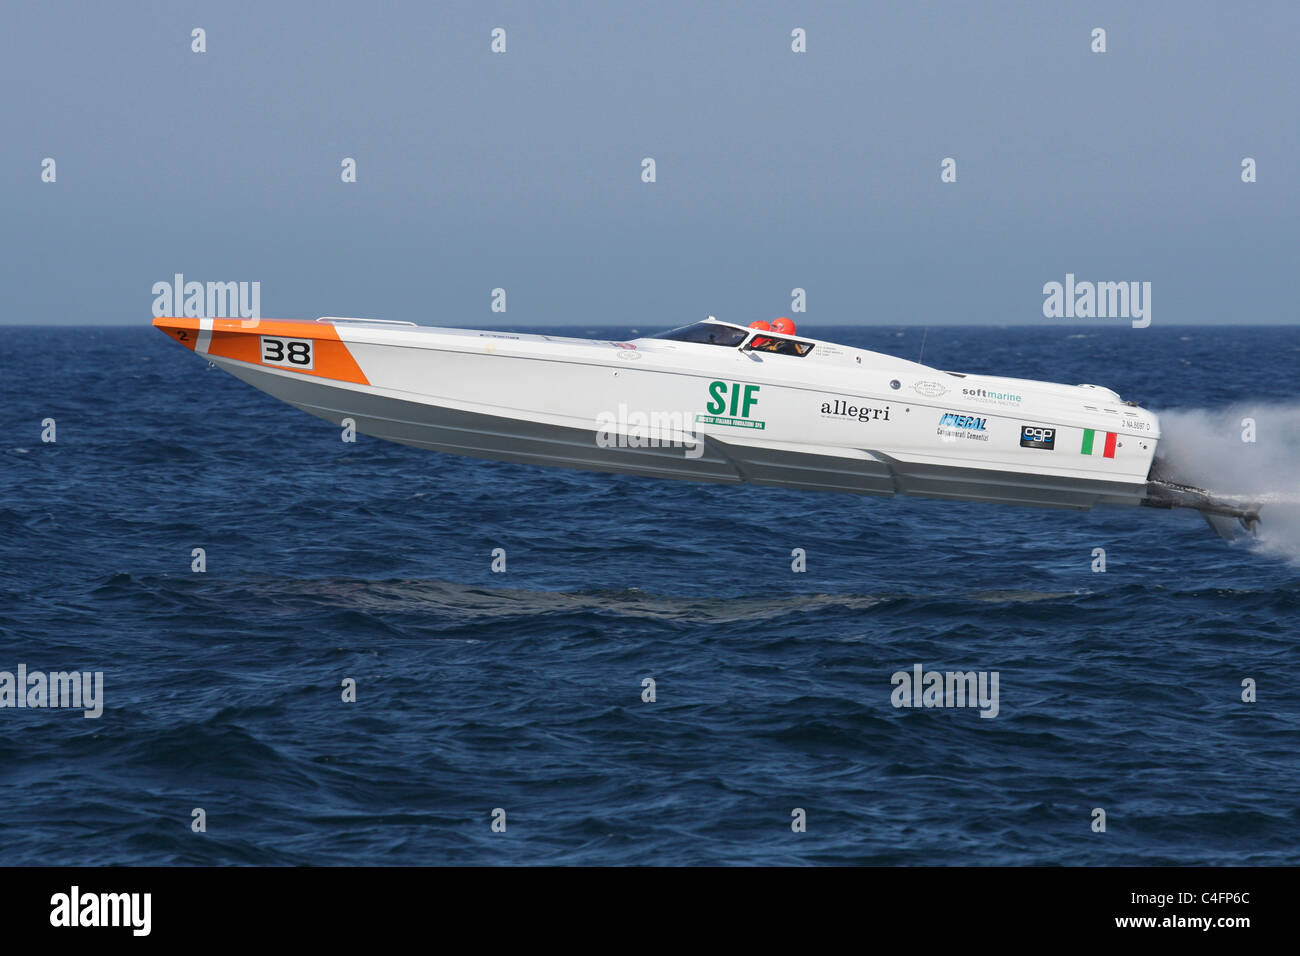 Supersport class boat no. 38 SIF takes to the air during the UIM Ocean Grand Prix sprint race, Malta, 11 June 2011 Stock Photo